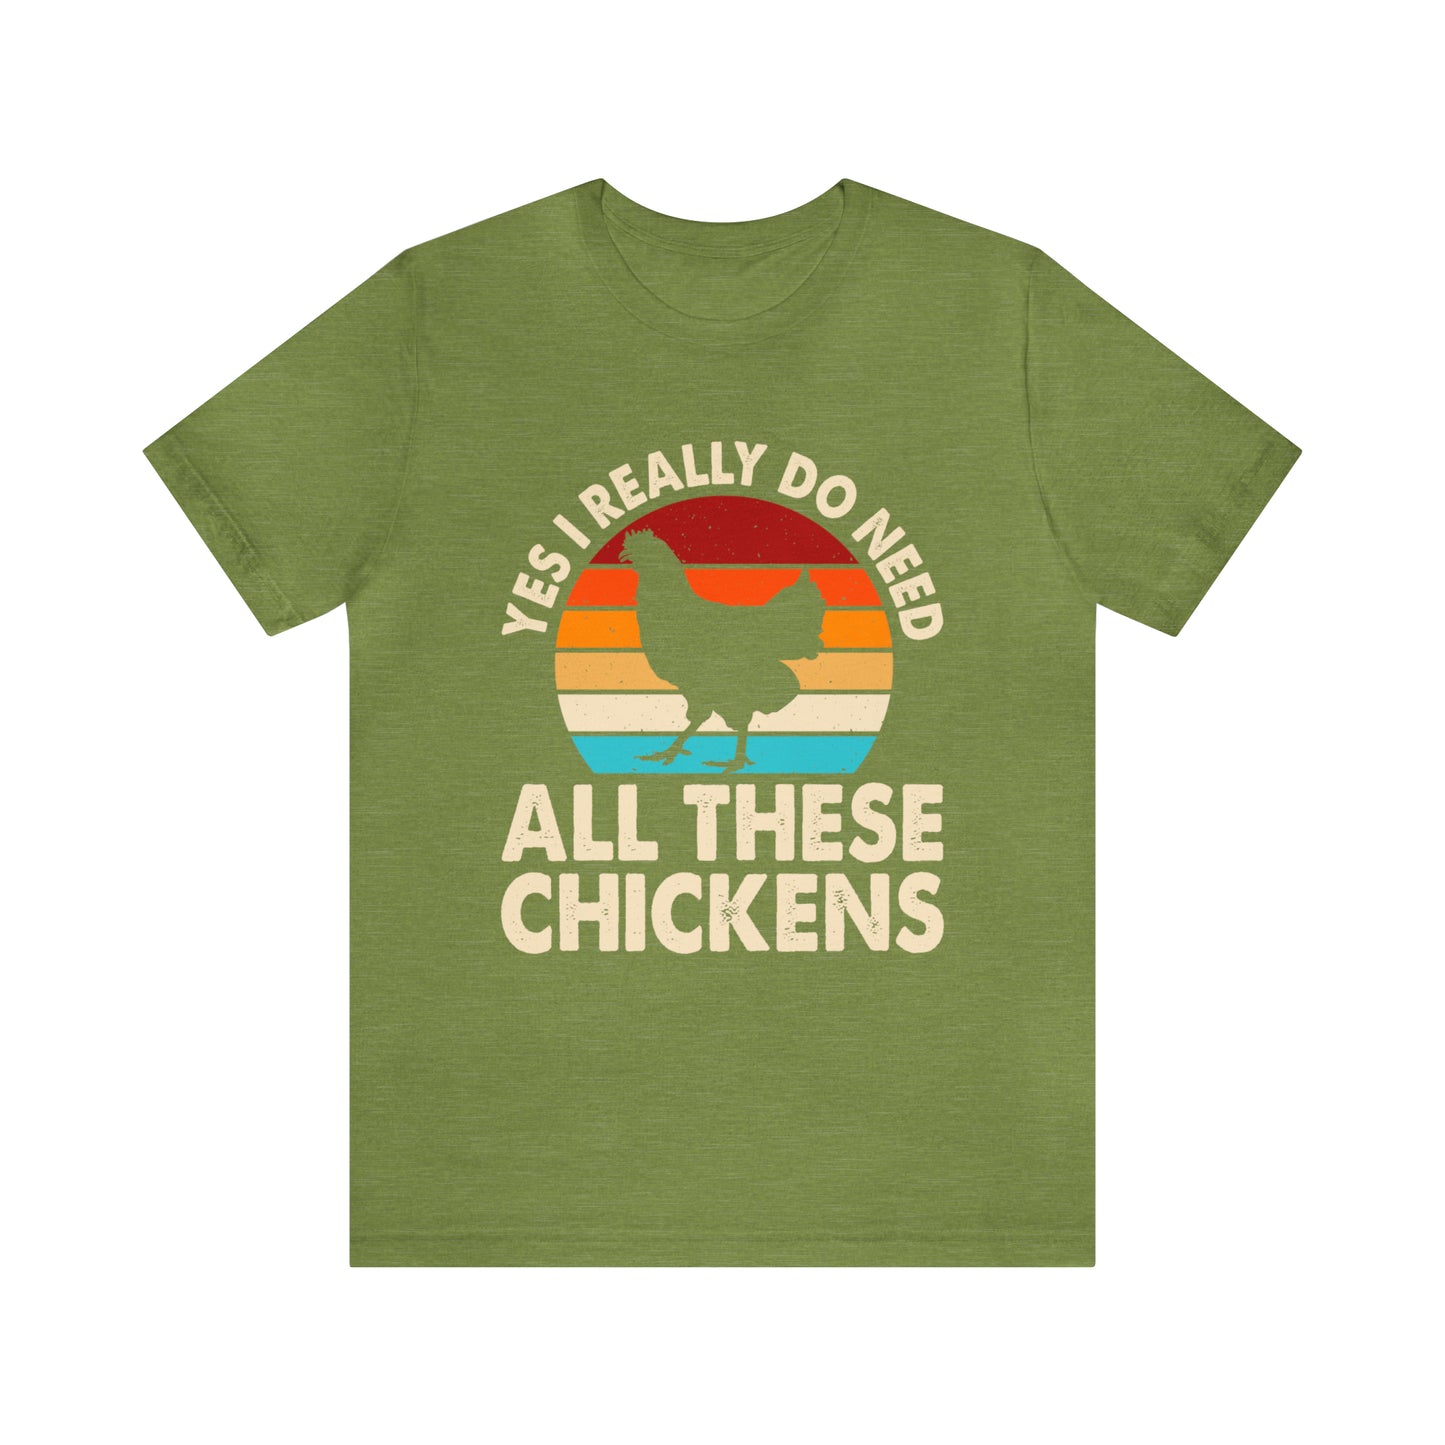 Yes, I Really Do Need All These Chickens T-Shirt